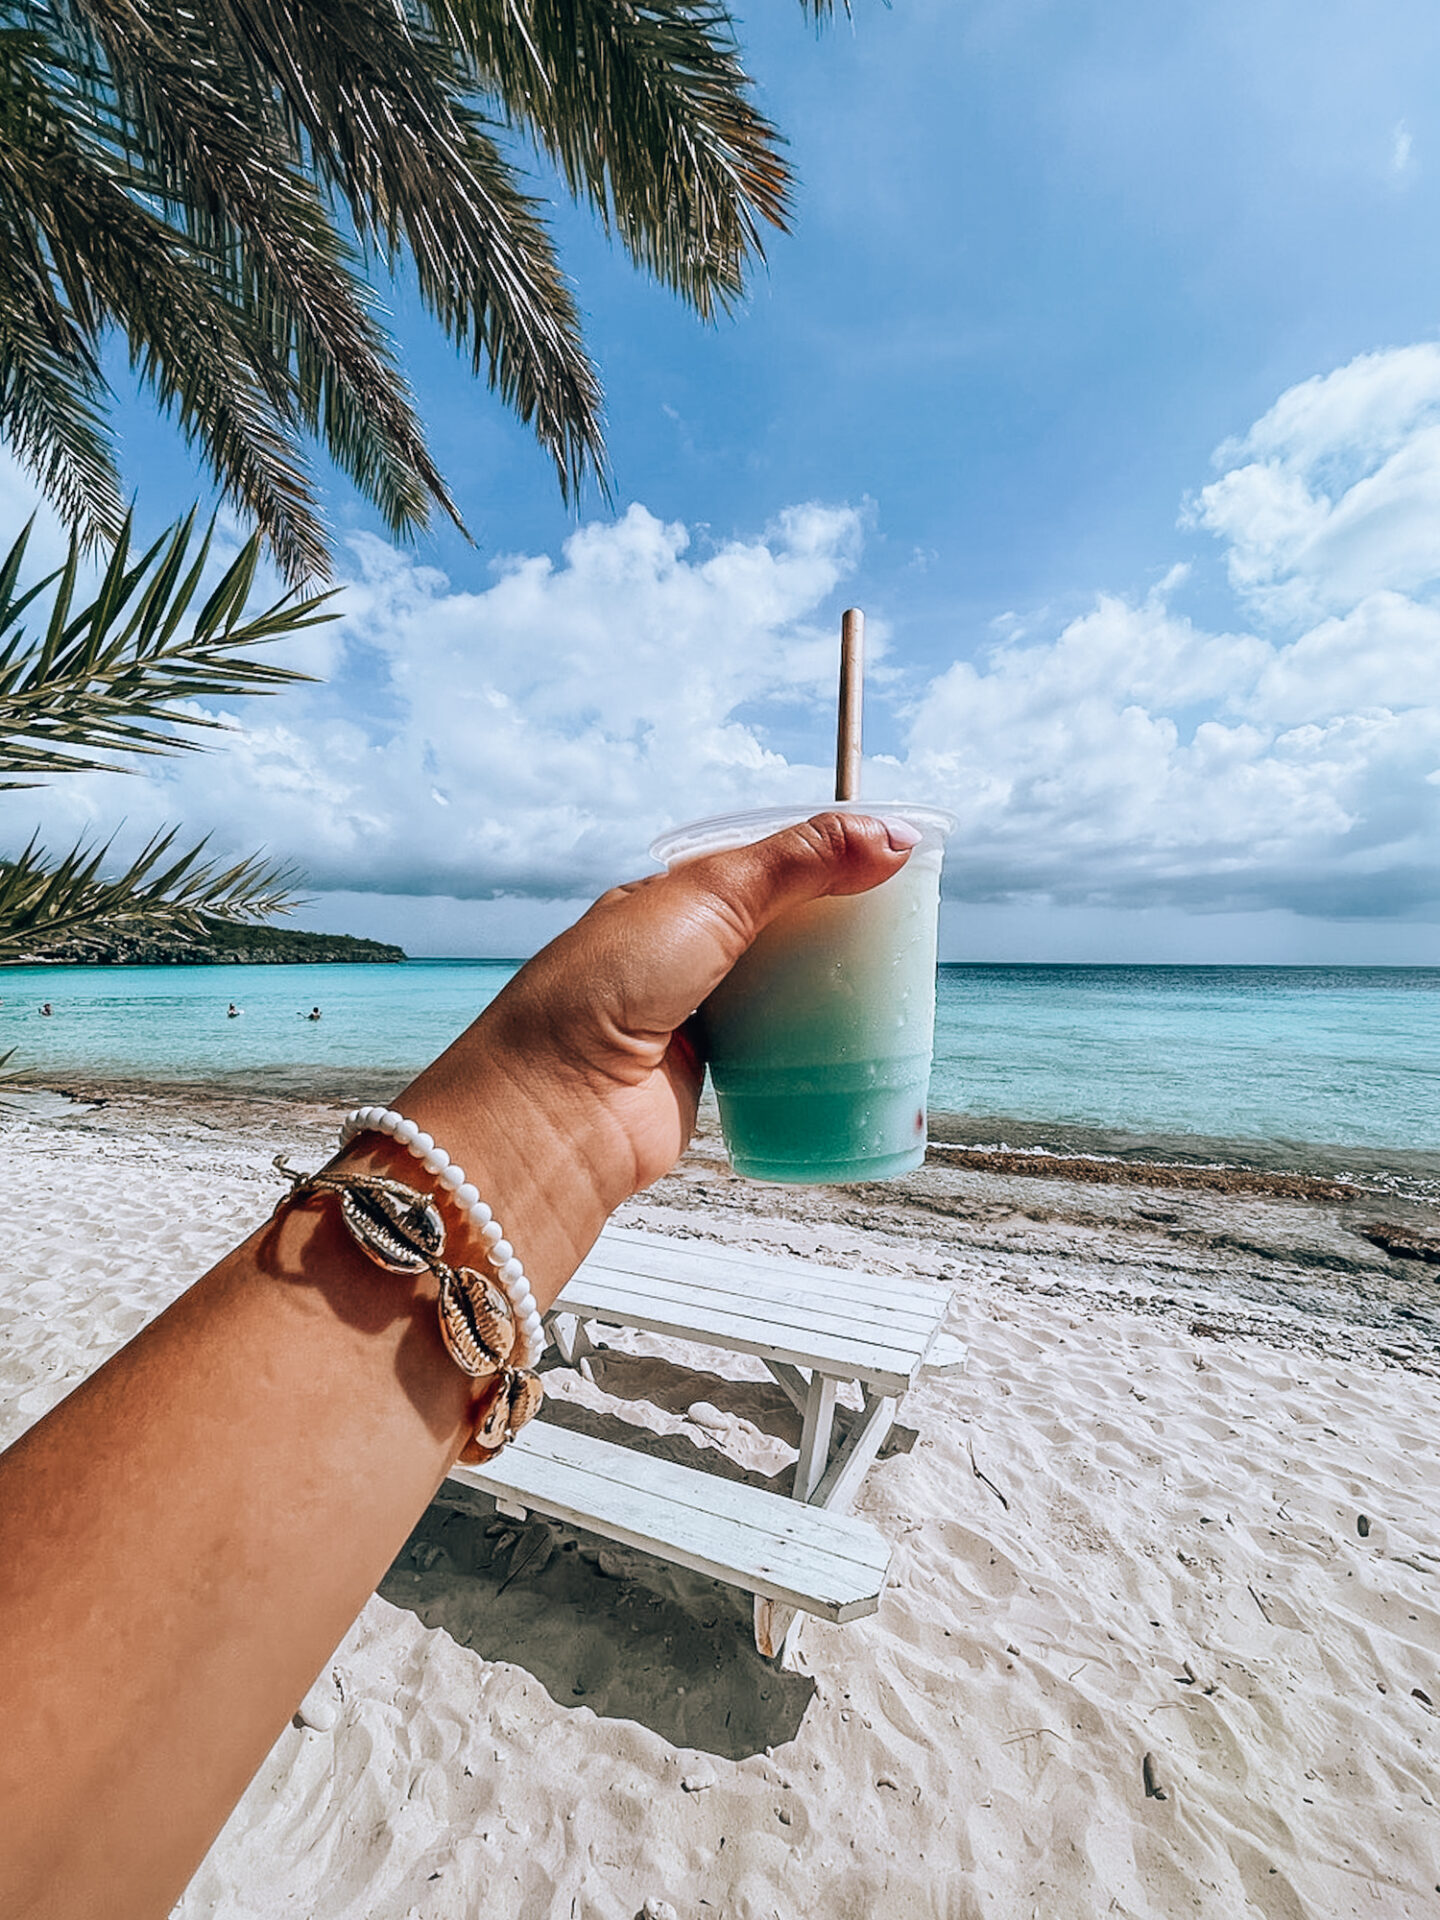 pina colada made from curacao blue against turquoise waters of this famous beach in curacao